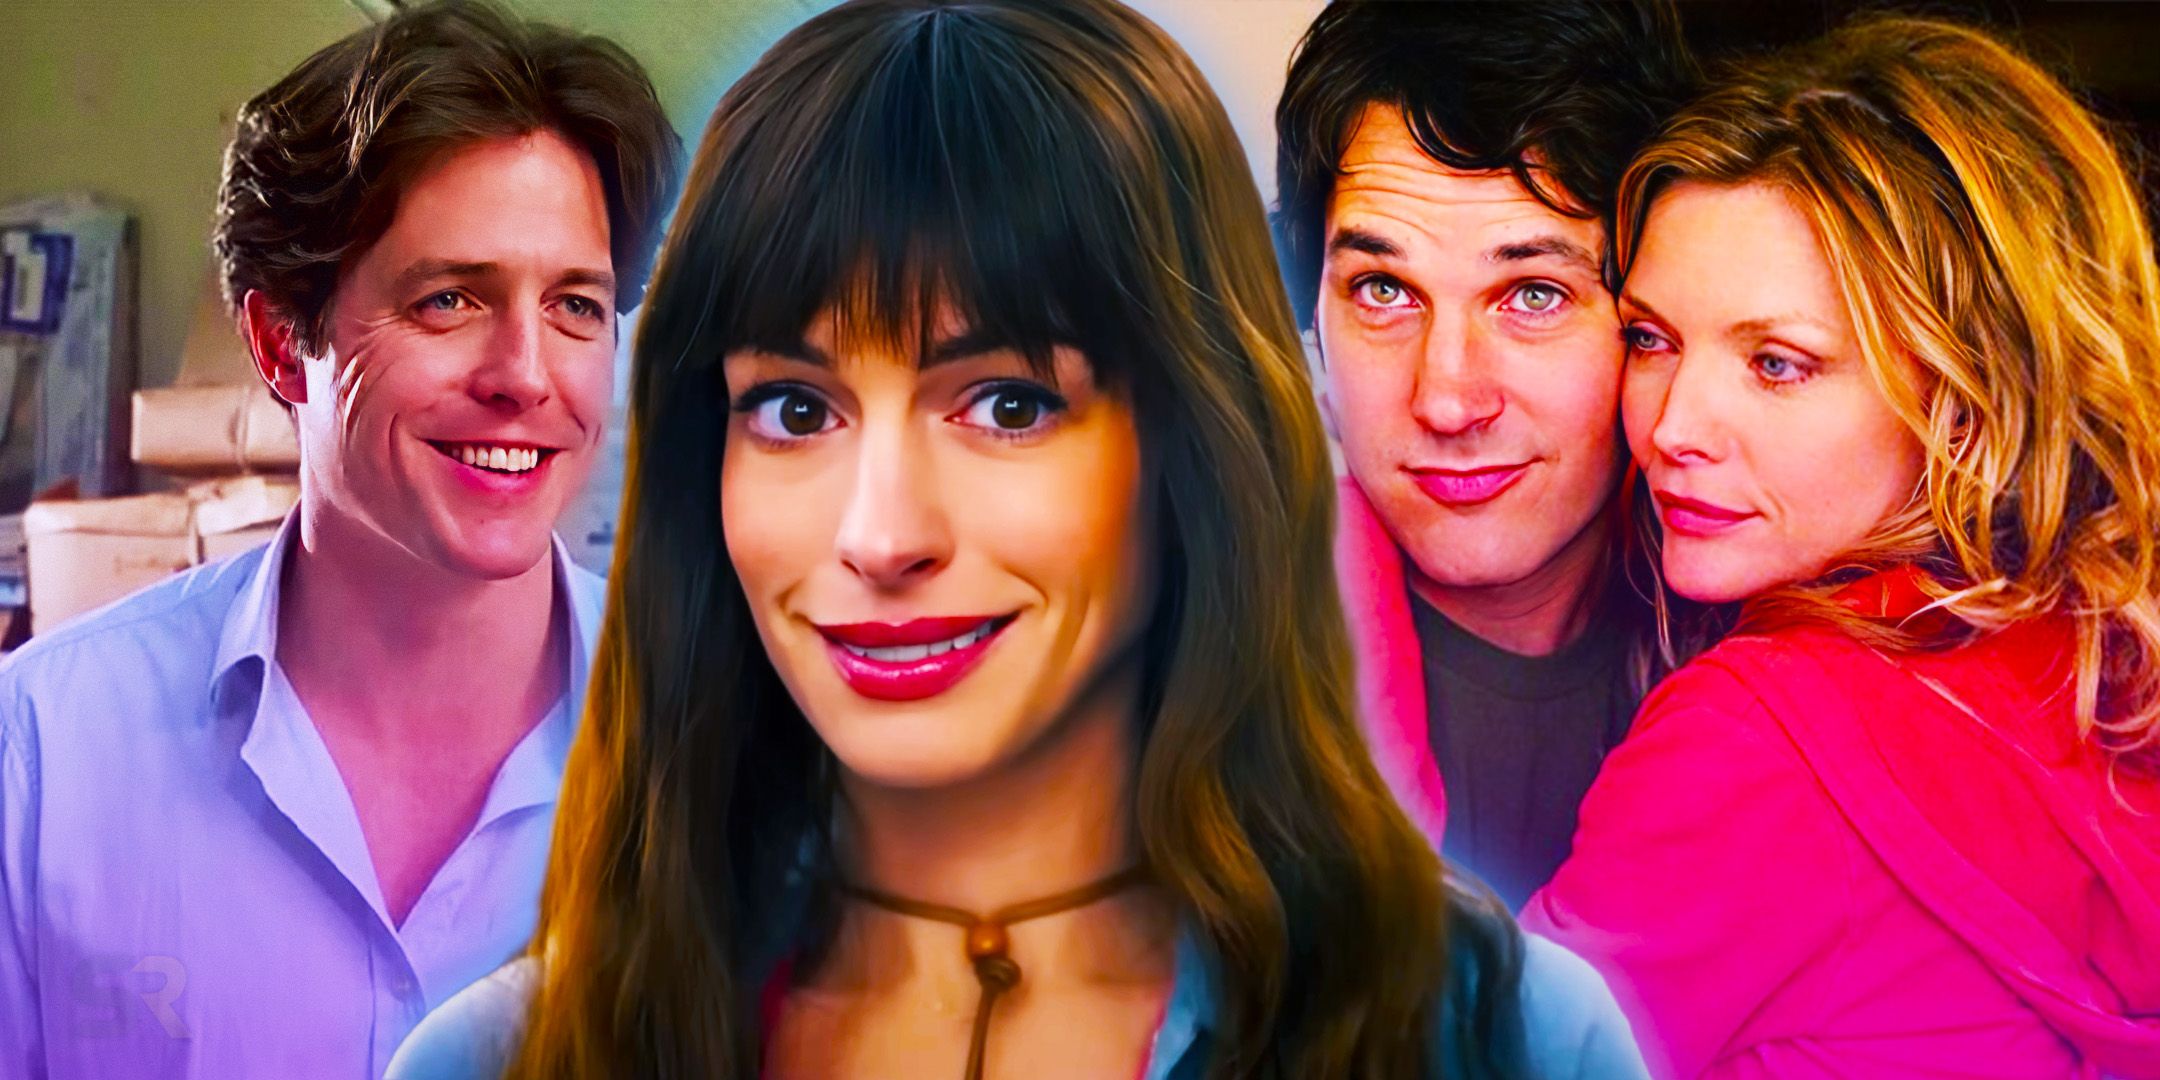 Custom image of (left to right) Hugh Grant, Anne Hathaway, Paul Rudd, and Michelle Pfeiffer.